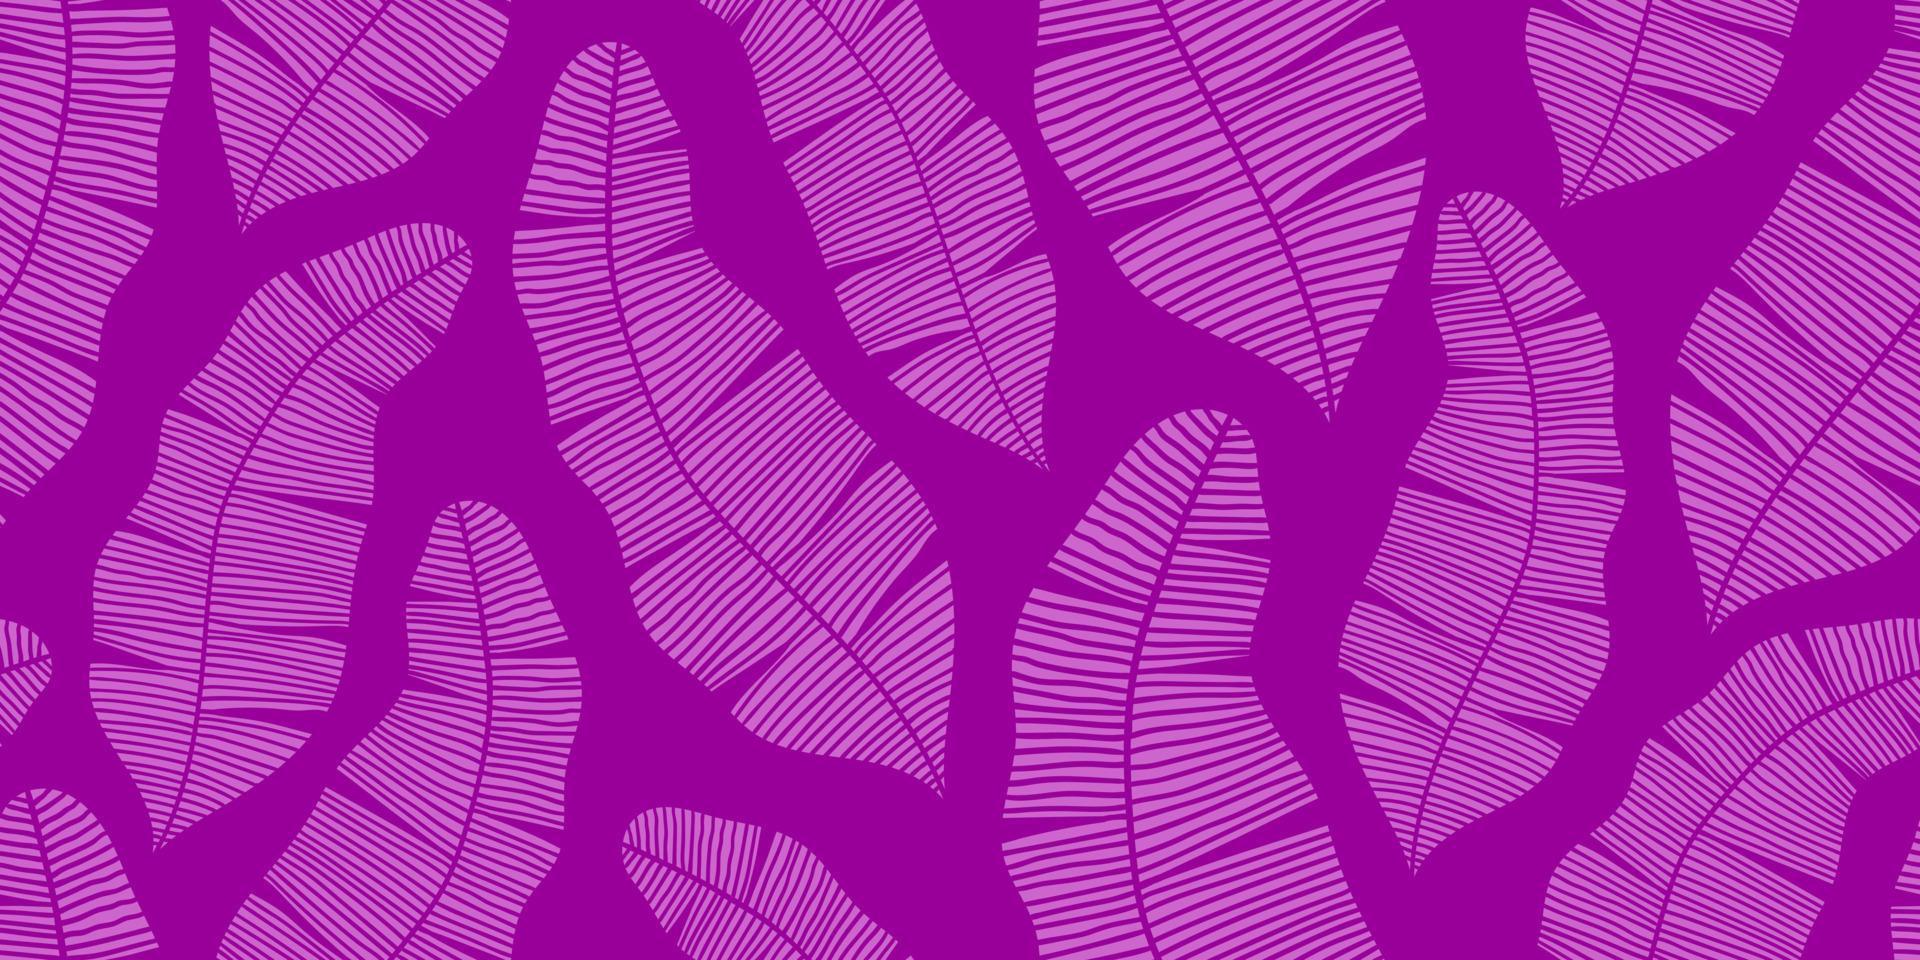 ABSTRACT VECTOR SEAMLESS LILAC BANNER WITH PINK BANANA LEAVES